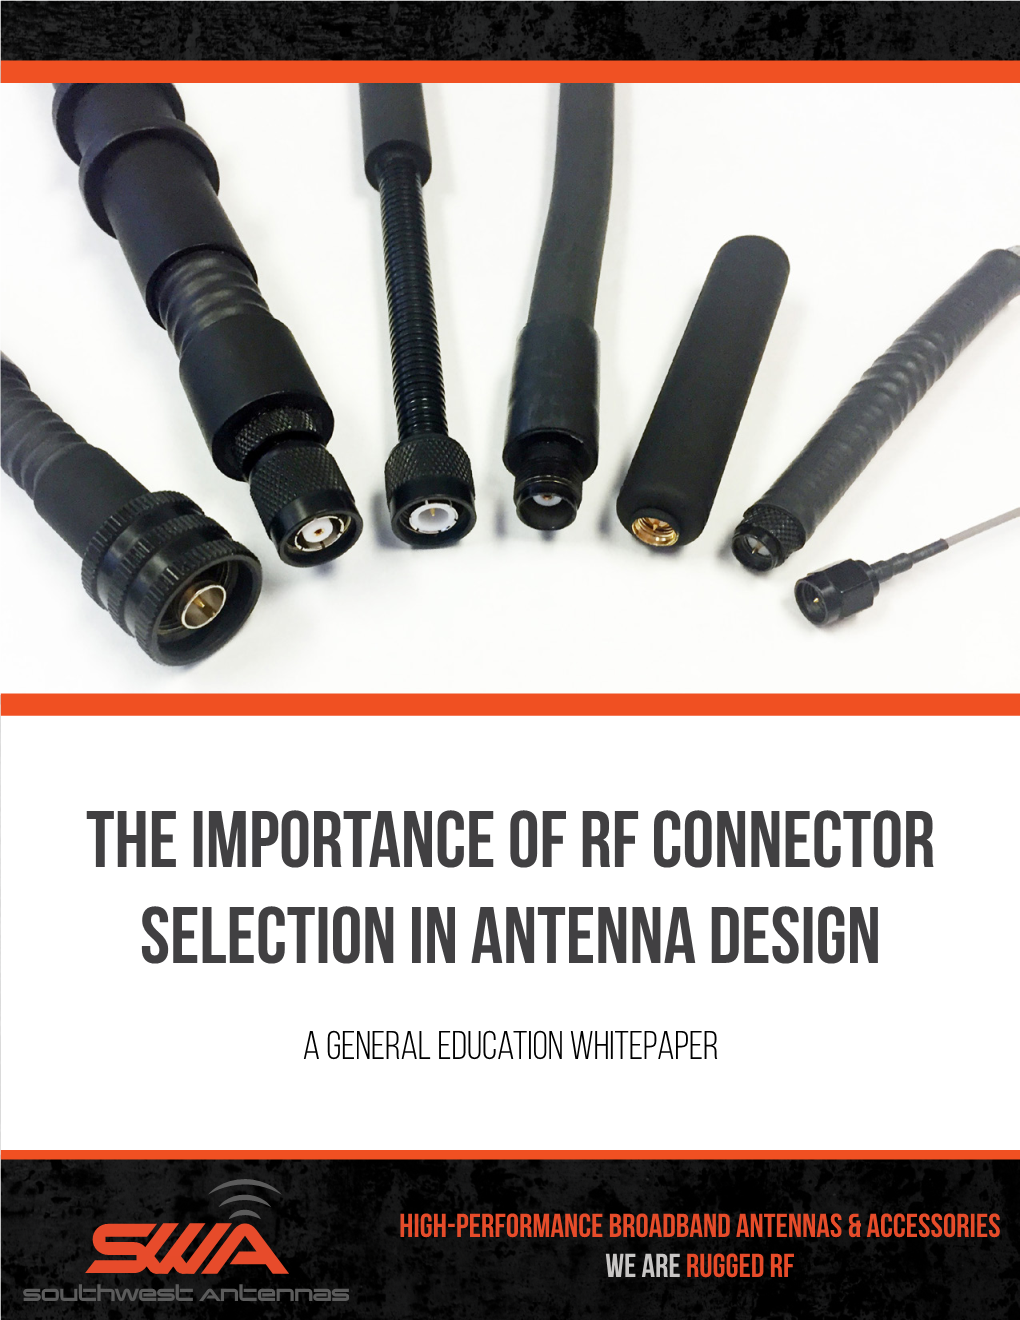 The Importance of RF Connector Selection in Antenna Design Whitepaper